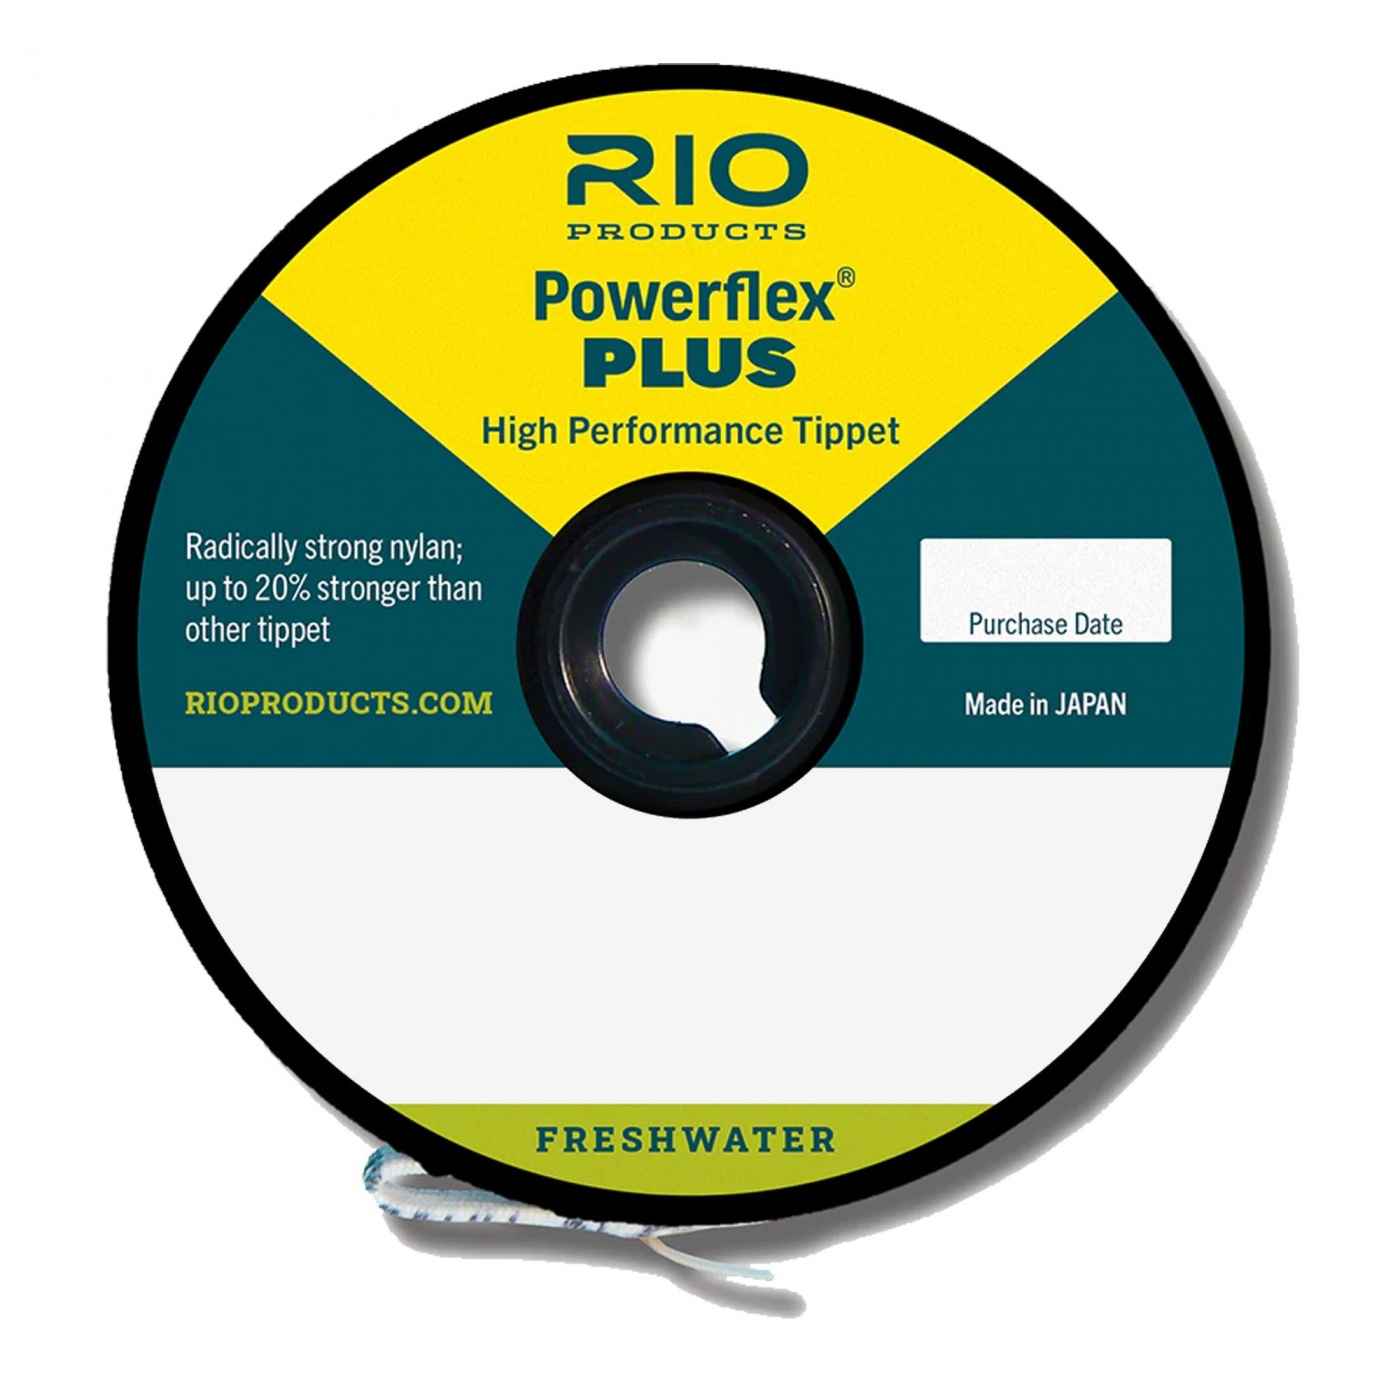 Rio Products Powerflex Plus Tippet 7X 2.75lb / 1.3kg For Trout & Grayling Fly Fishing